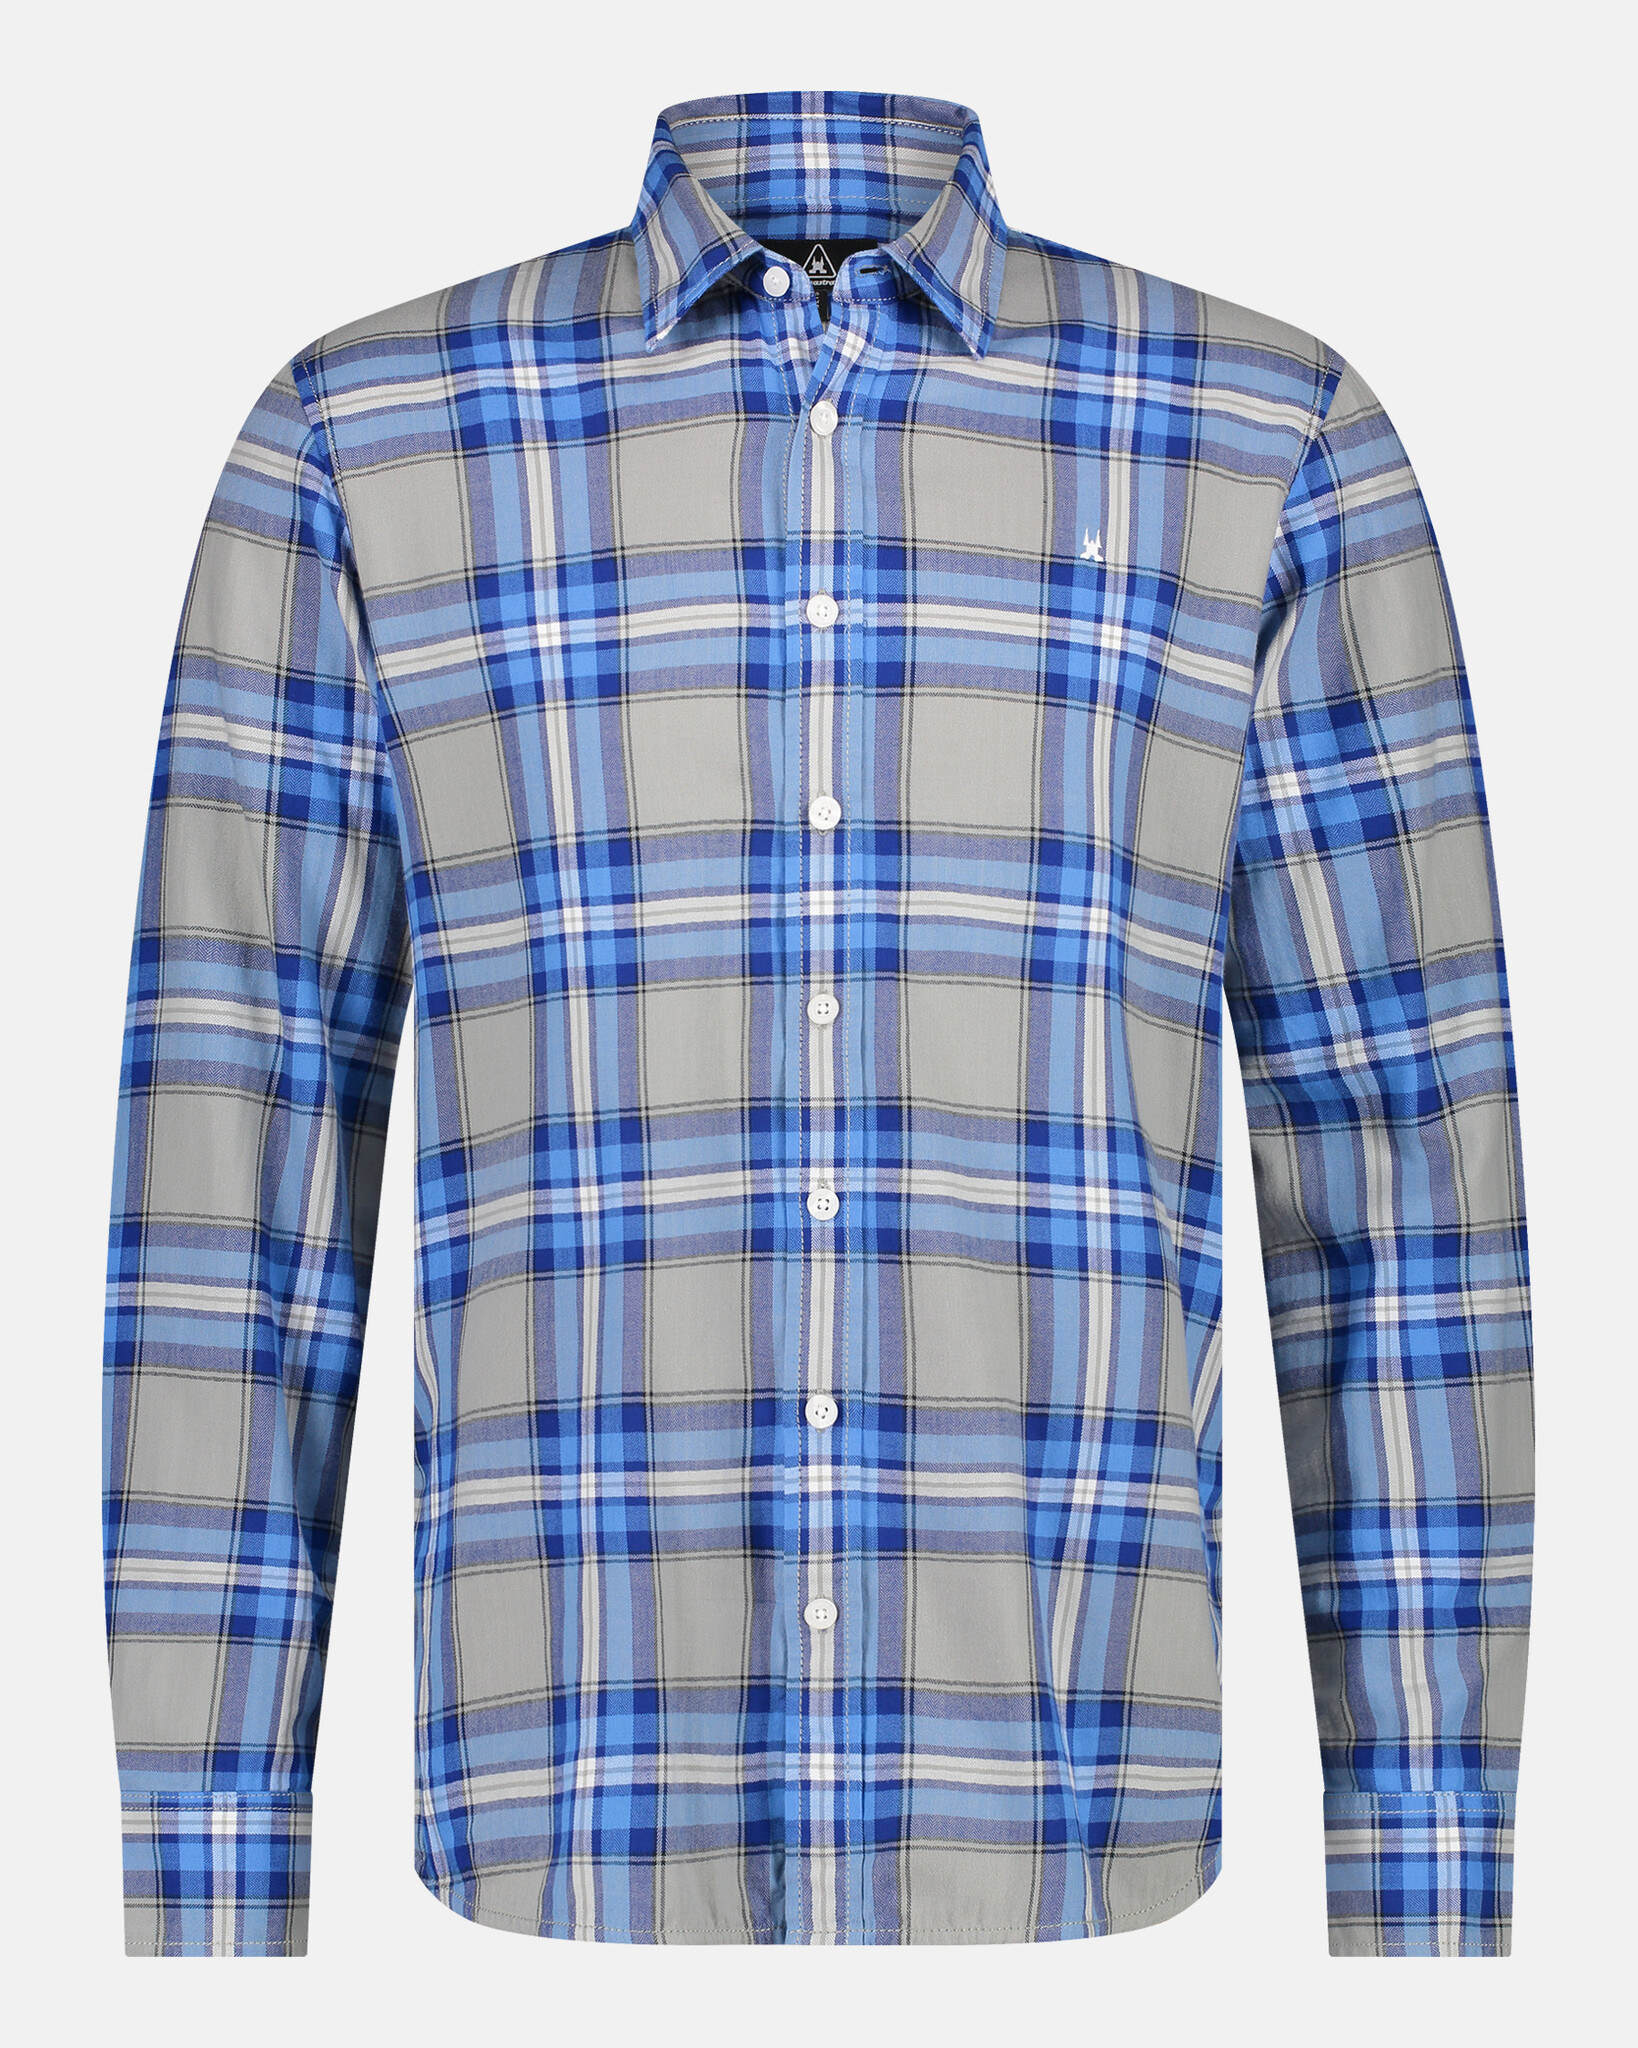 Mens Regular fit 100% cotton herringbone, yarn dyed check shirt with two chest pockets and bias cut yoke